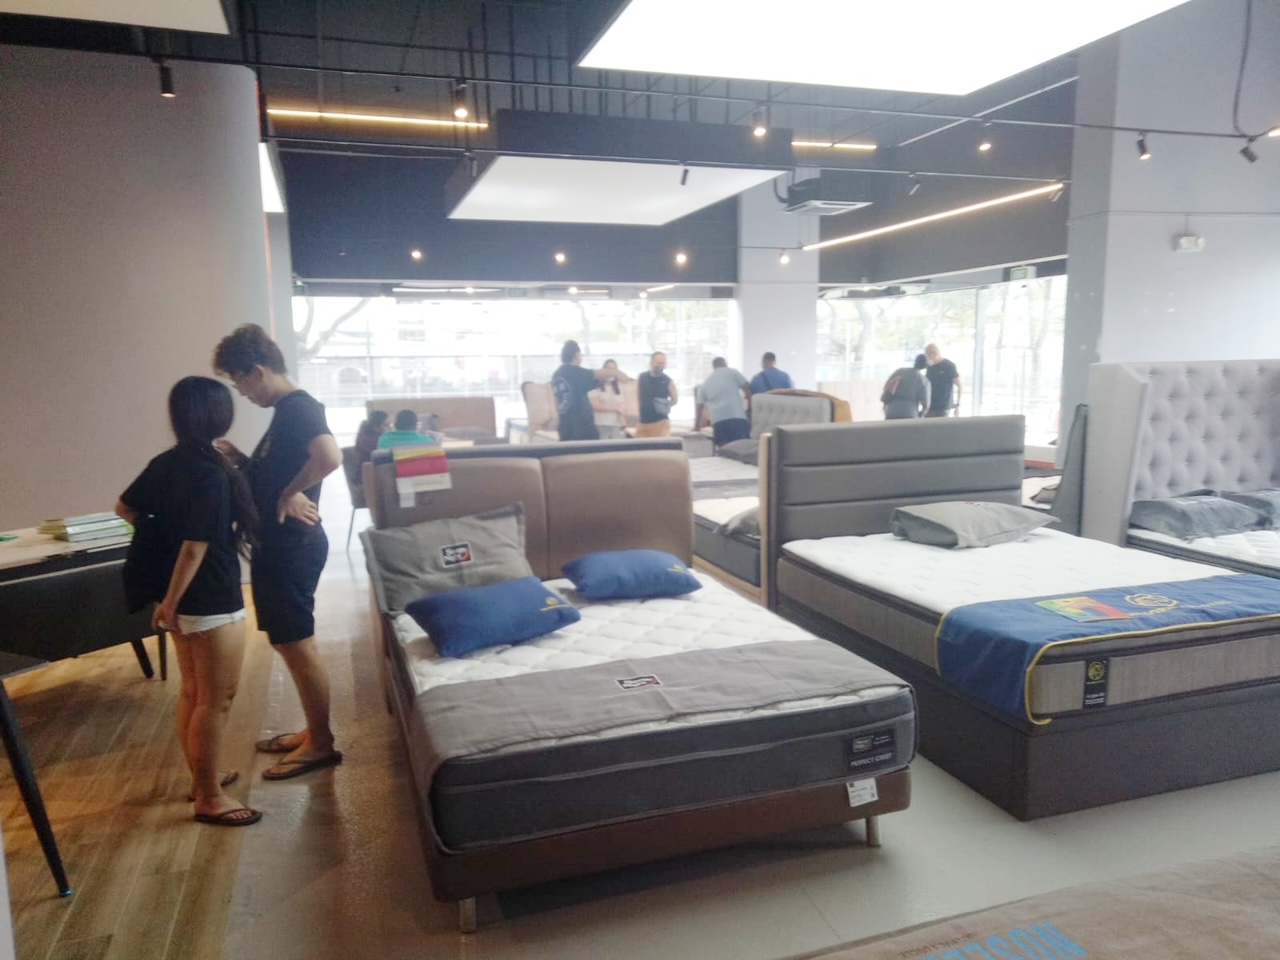 Lobang: Furniture Store Offering $88 Storage Beds When You Purchase A Mattress from 1 - 12 Mar 23 - 23